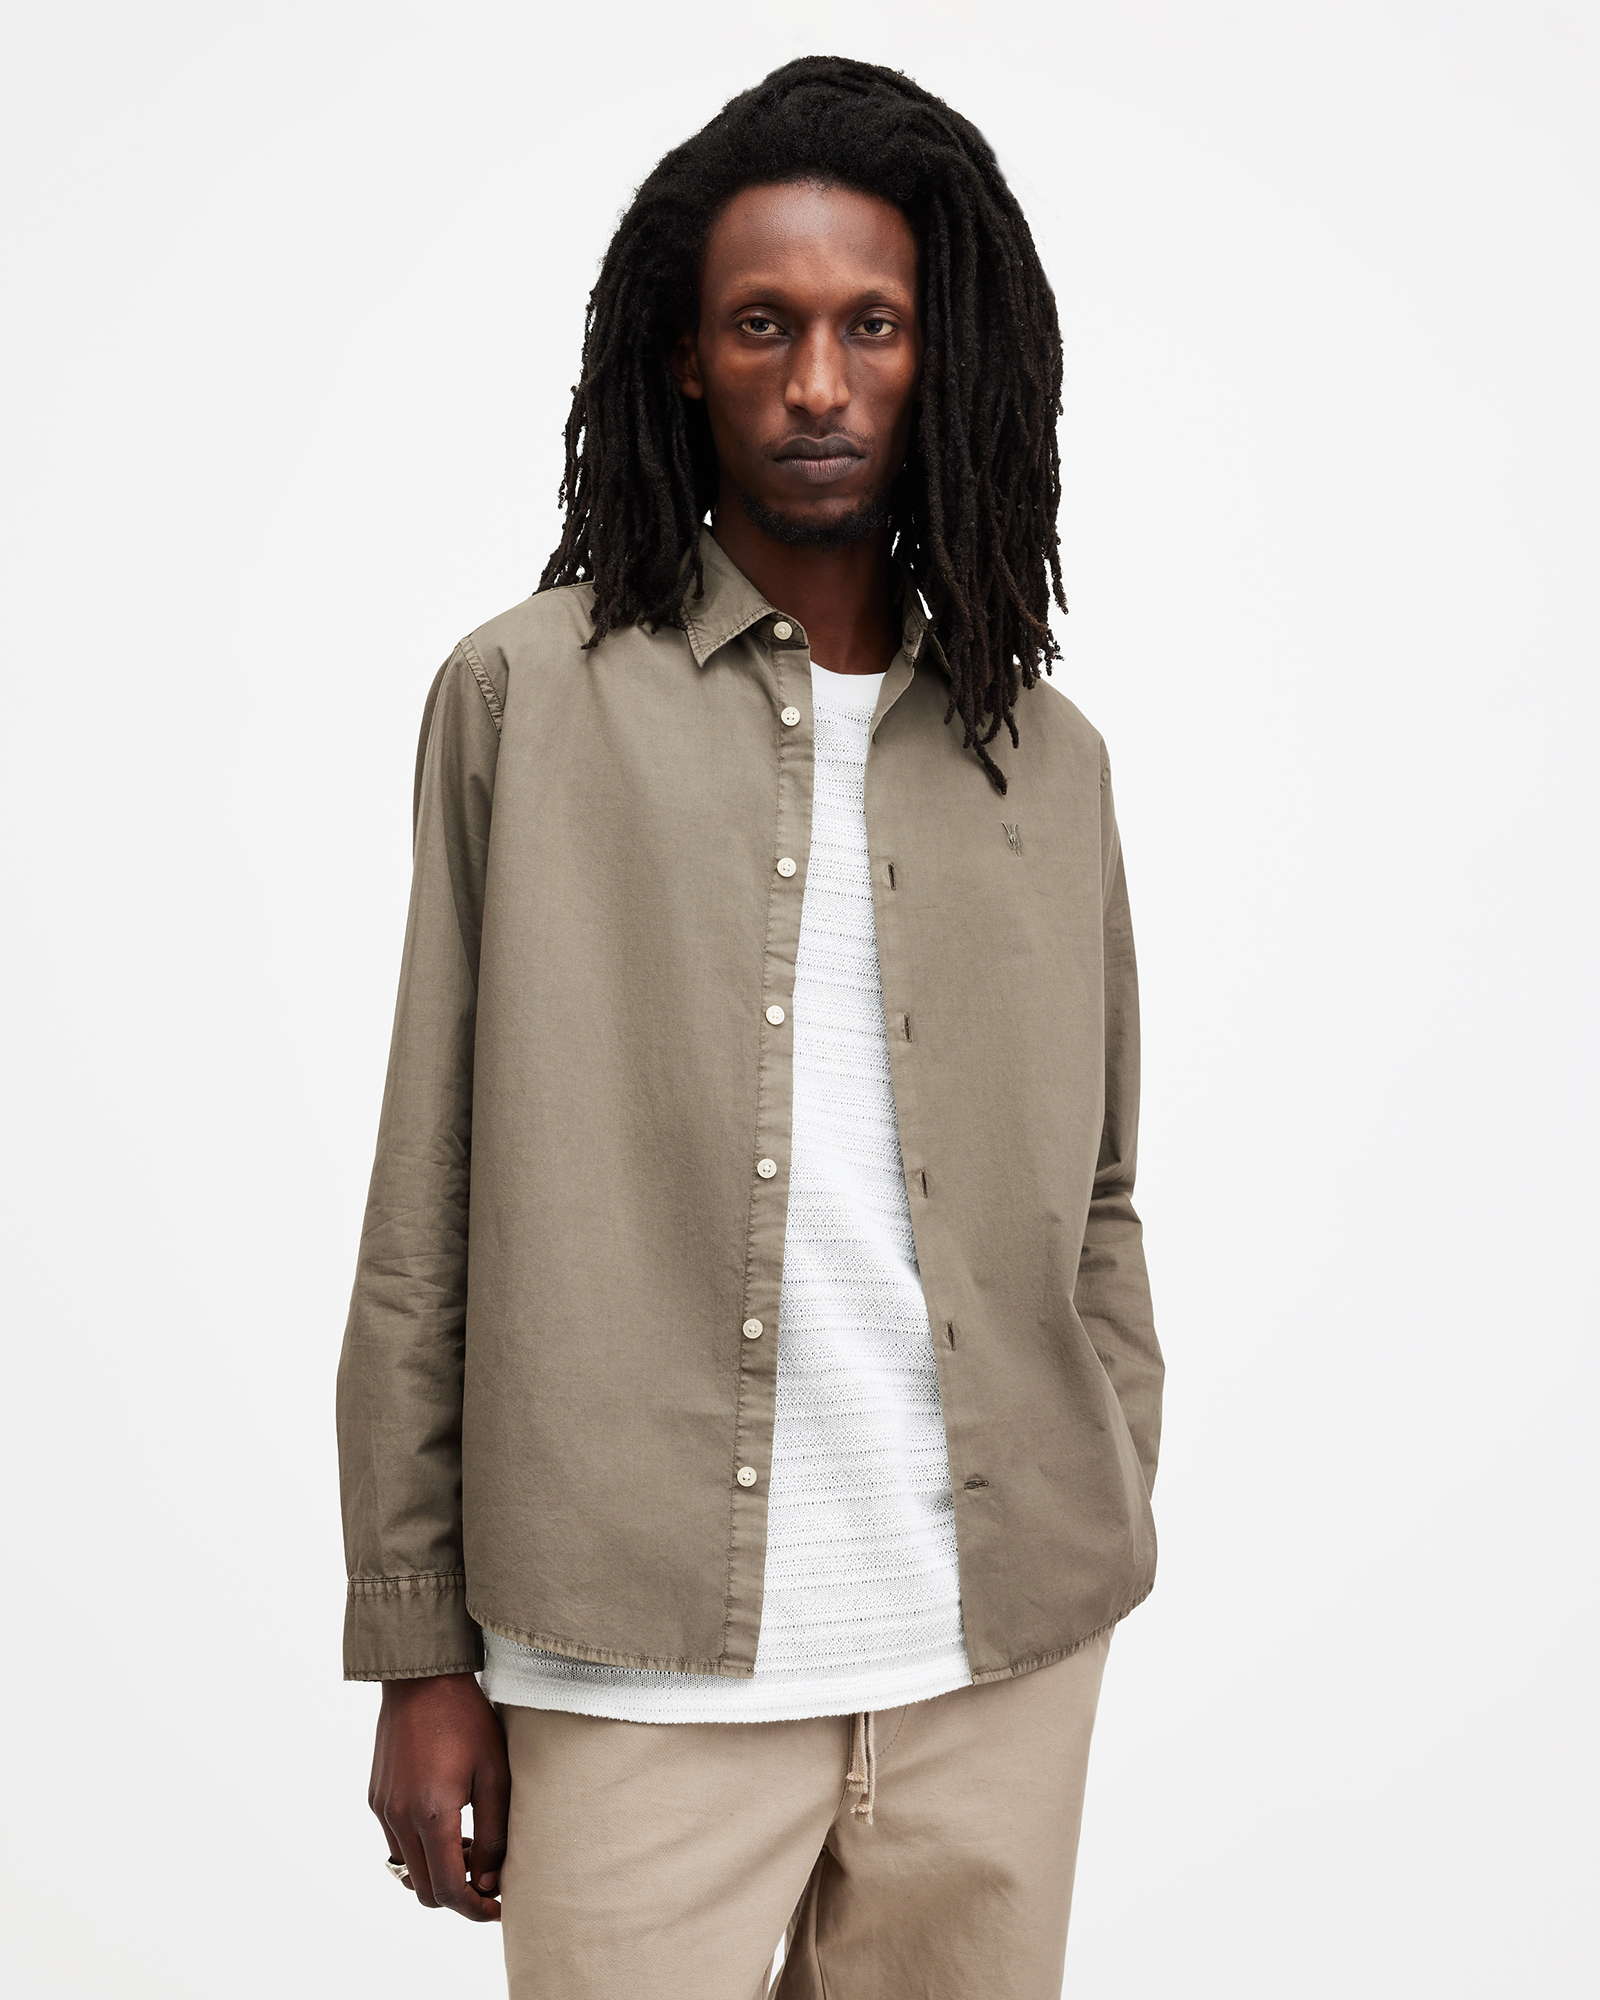 AllSaints Tahoe Garment Dyed Relaxed Fit Shirt,, ACRE BROWN